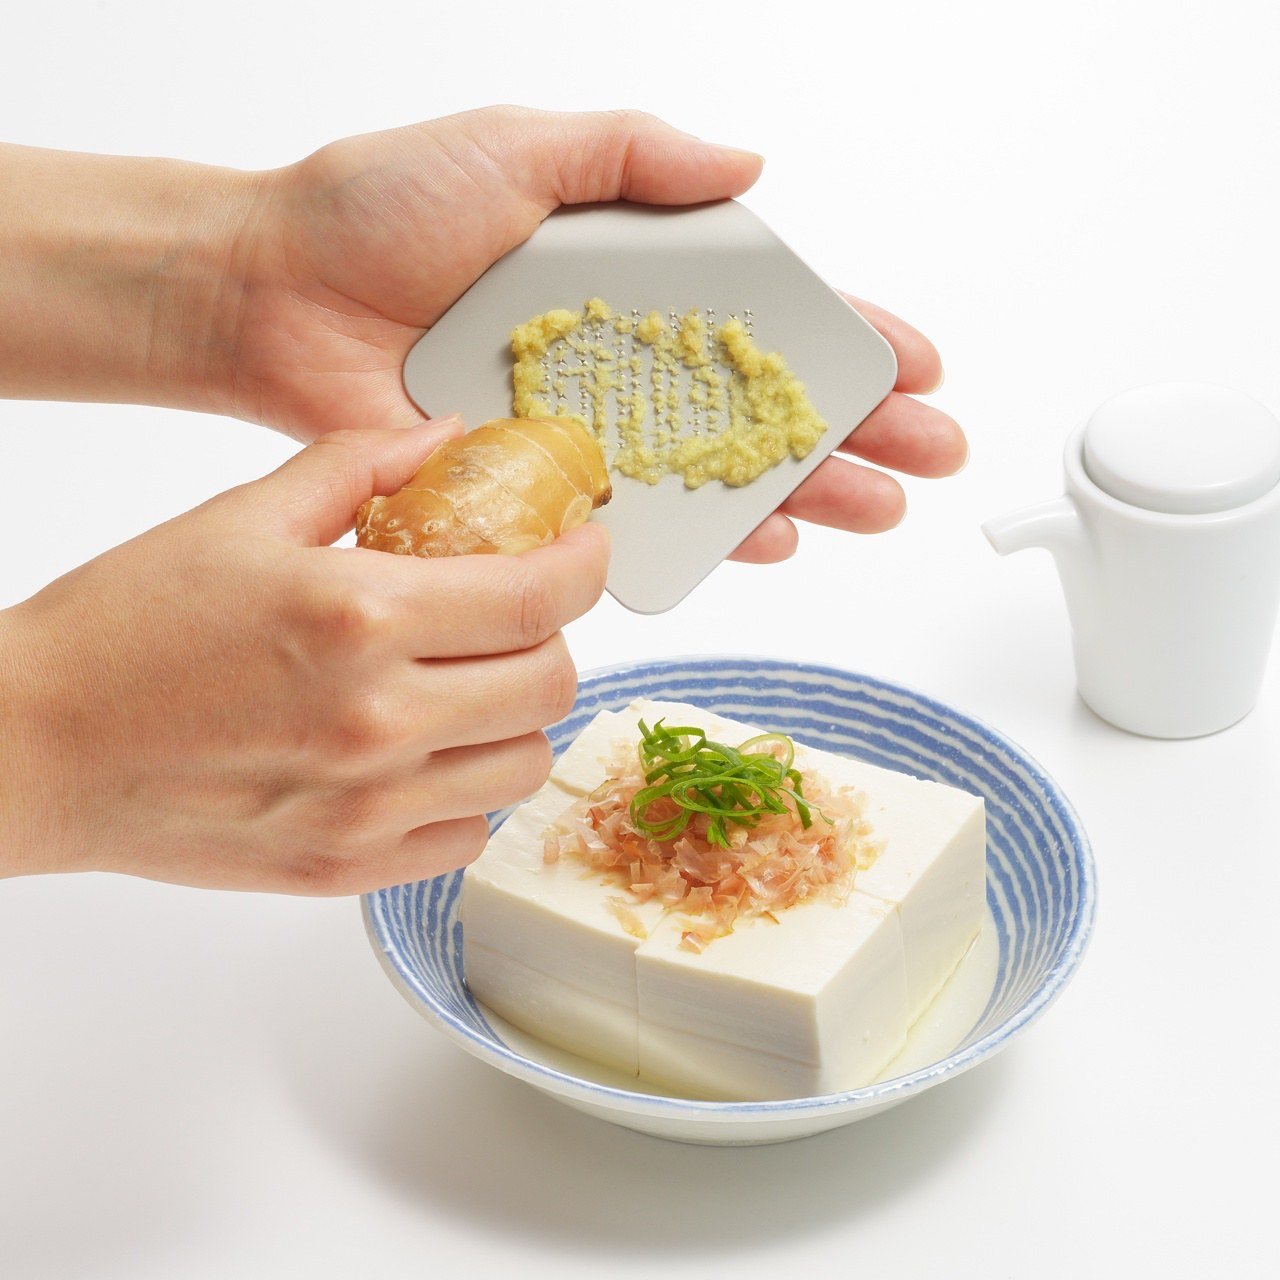 This mini handheld grater makes it easy to add flavor and joy to your meals